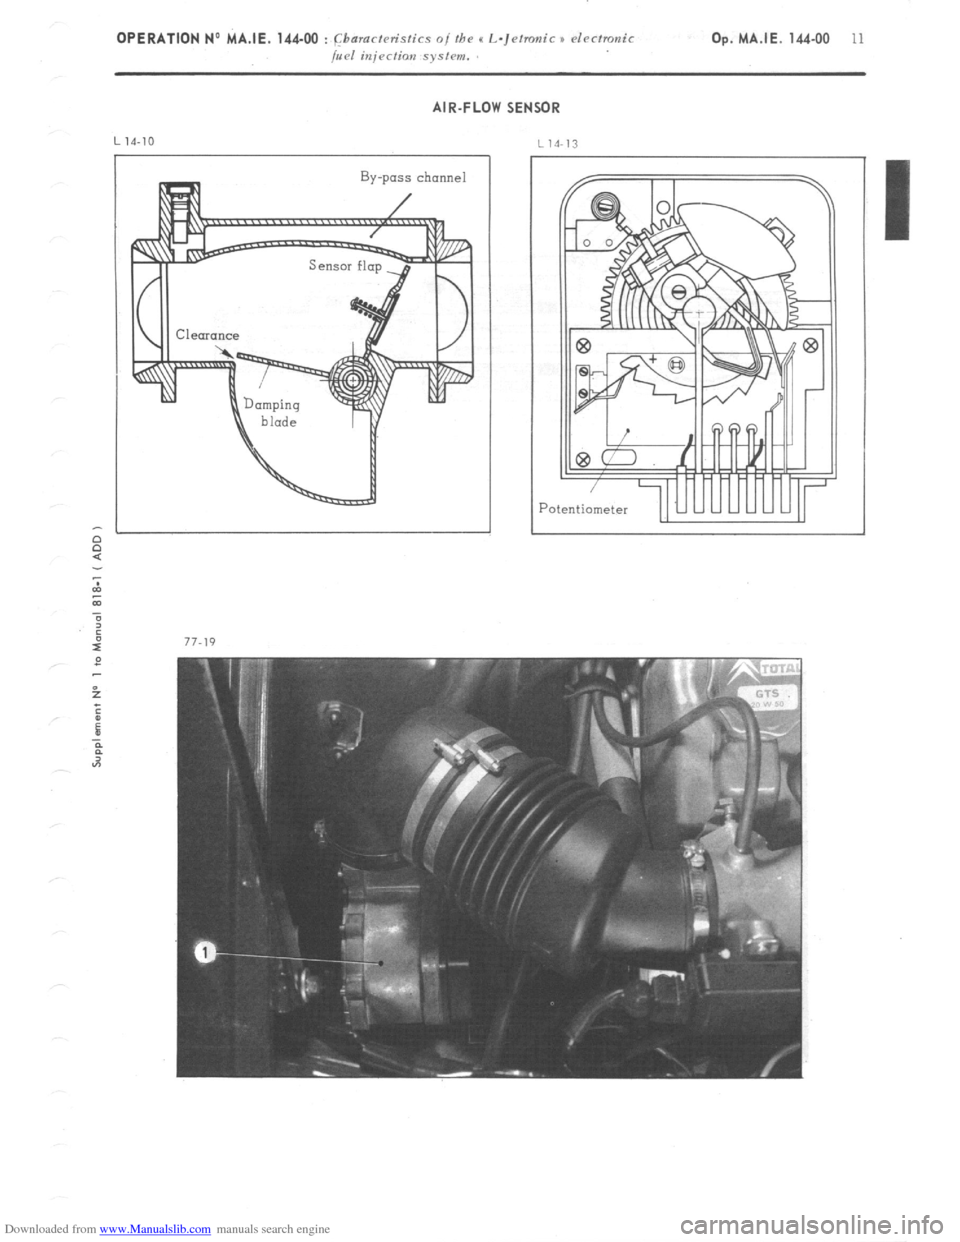 Citroen CX 1980 1.G Workshop Manual Downloaded from www.Manualslib.com manuals search engine OPERATION No MA.IE. 14400 : @ nracteristics of the I( L-~elronic x cl~~tronic 
fuel injrction sysfem. Op. MA.IE. 14400 11 
AIR-FLOW SENSOR 
‘